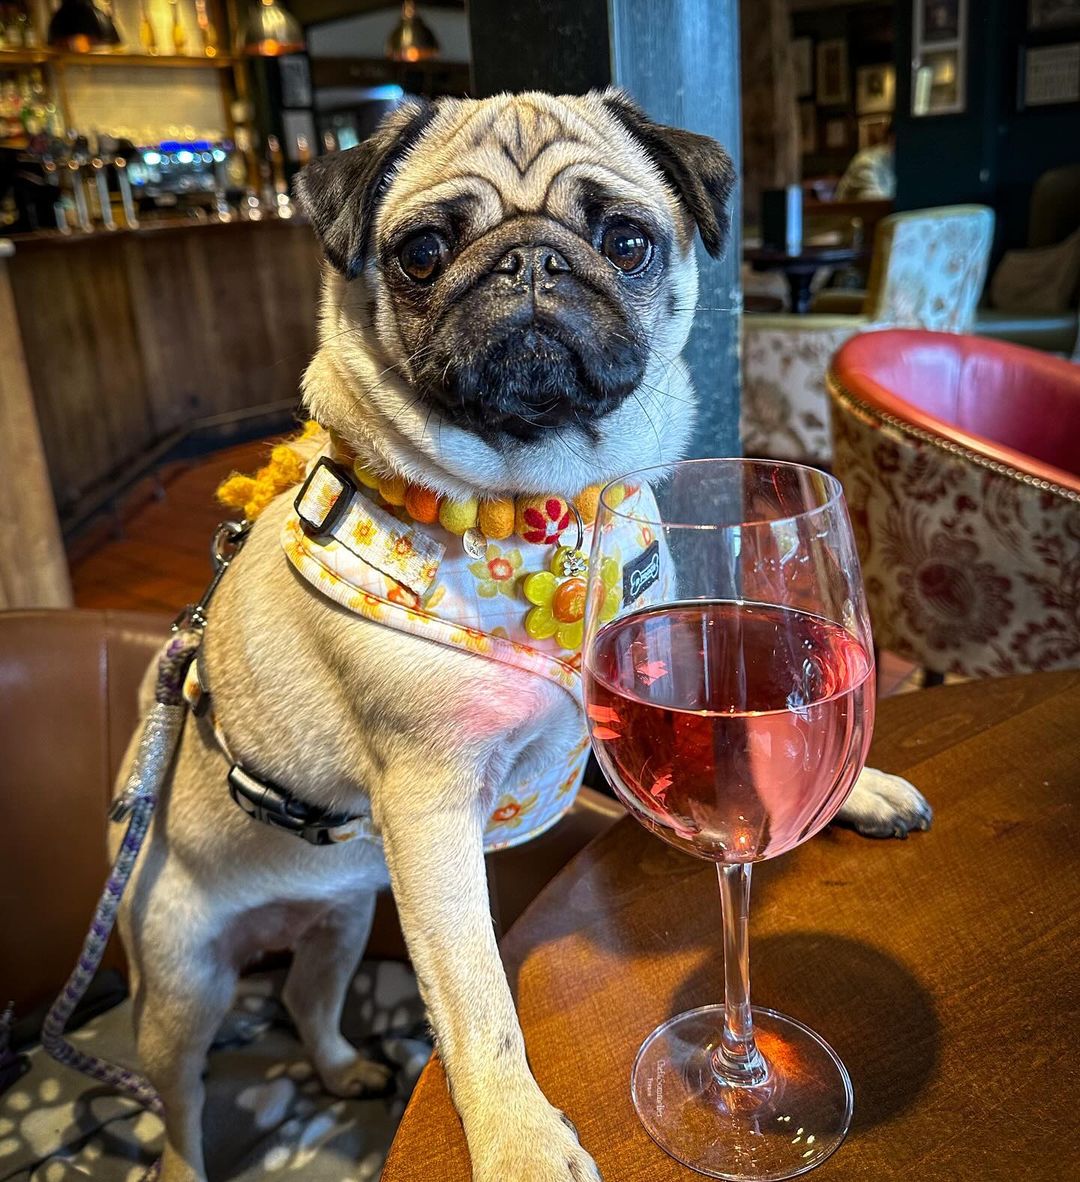 Happy fizz Friday 🍷 hope you all have a fab one 💜💜

#cookiethepug #fizzfriday  #cutepug #fawnpug #pugobsessed #vintageinns #dogfriendly #pugpoftheday